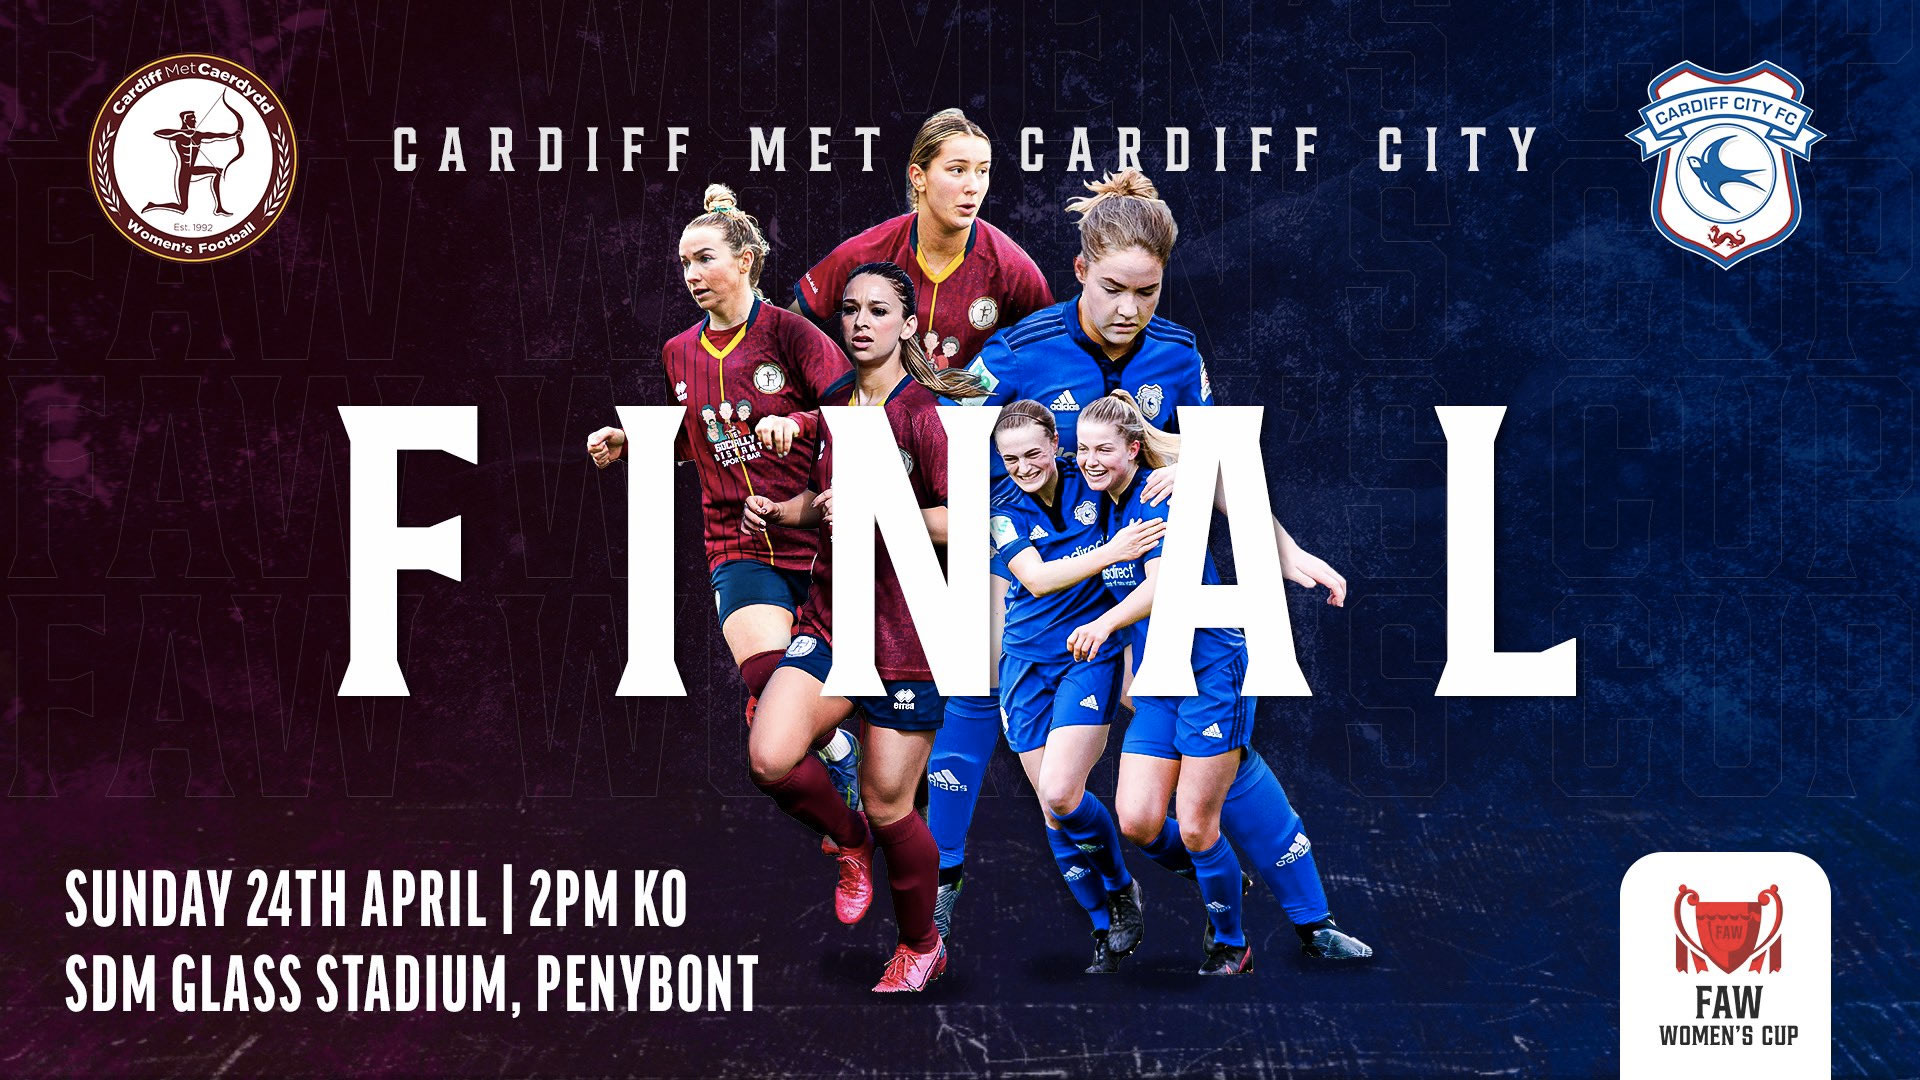 The Bluebirds face the Archers in the Cup final...